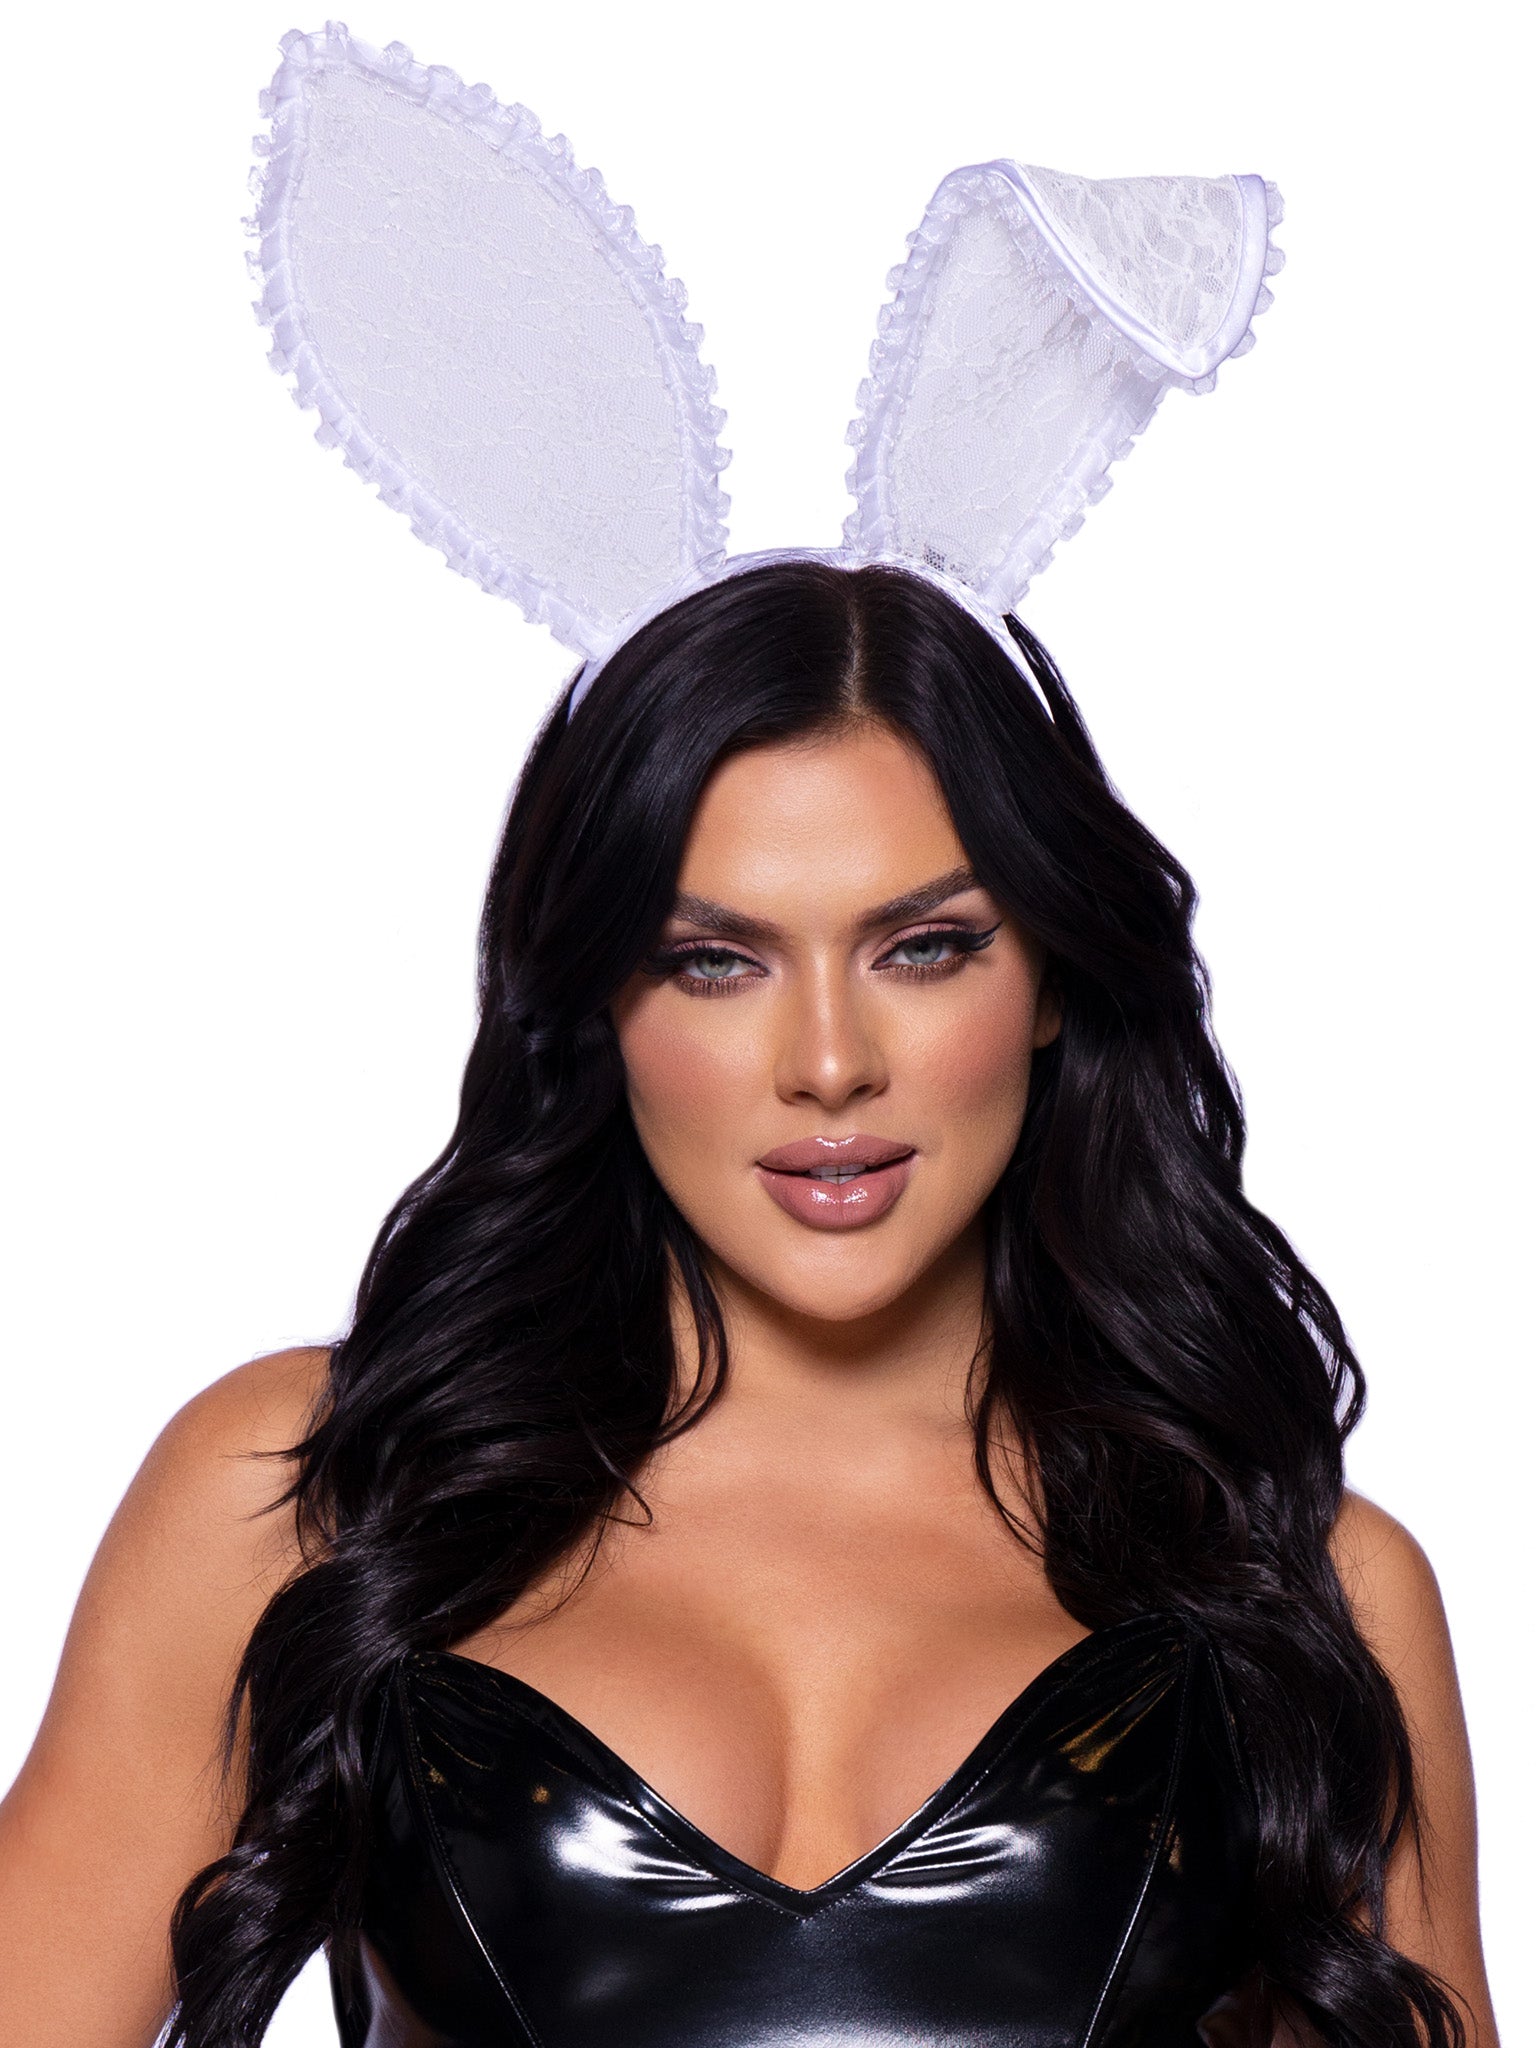 Bunny ears: the latest must-have accessory, Fashion